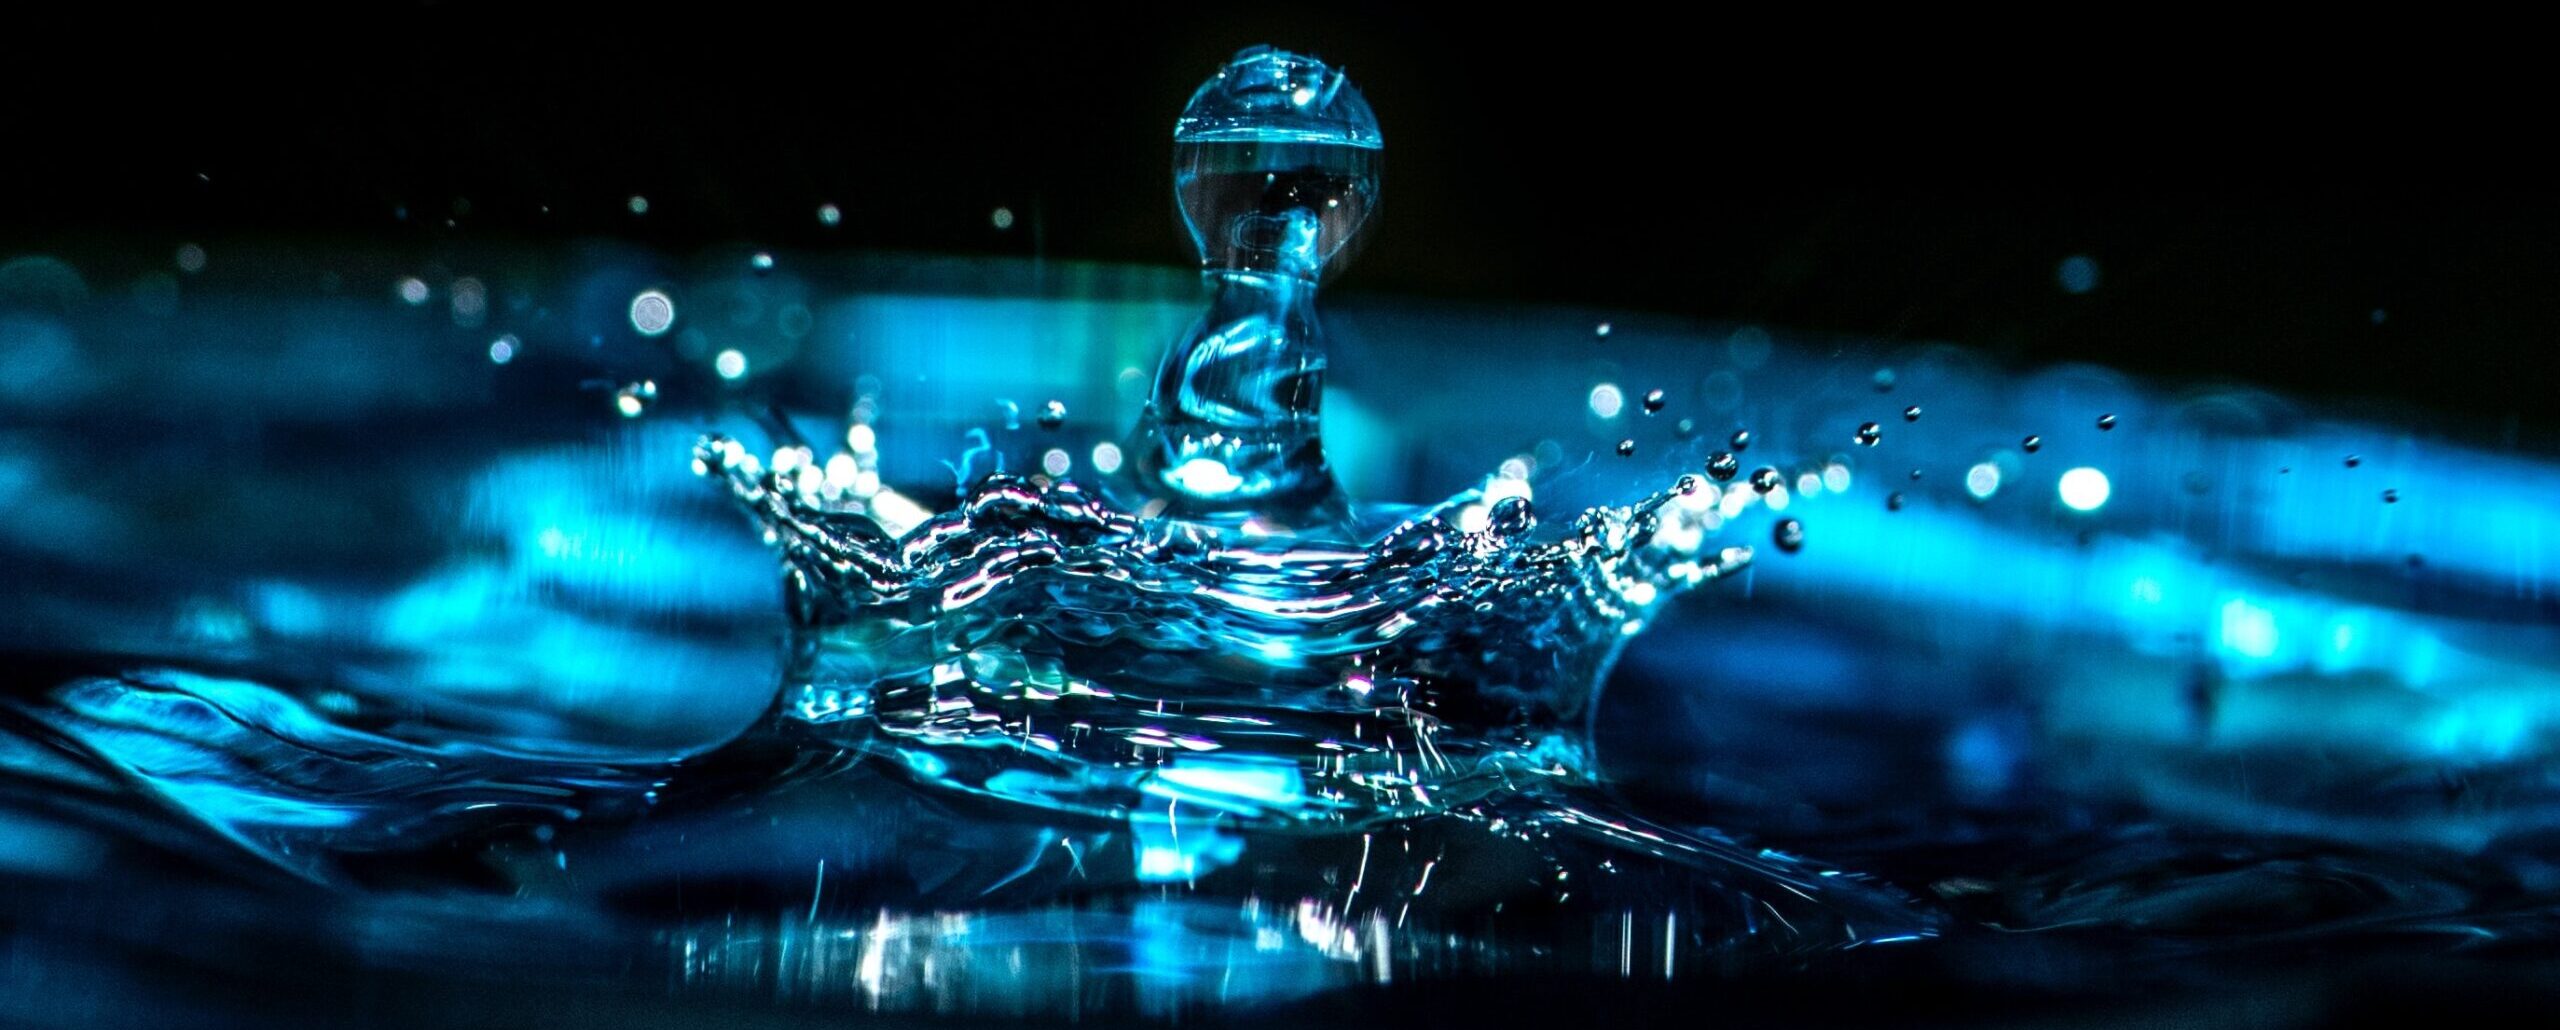 Close-up photo of the splash from a droplet falling into clear water. Like the ripple effect stretching out in all directions, the choices we make based on our digital literacies affect all aspects of our modern lives.